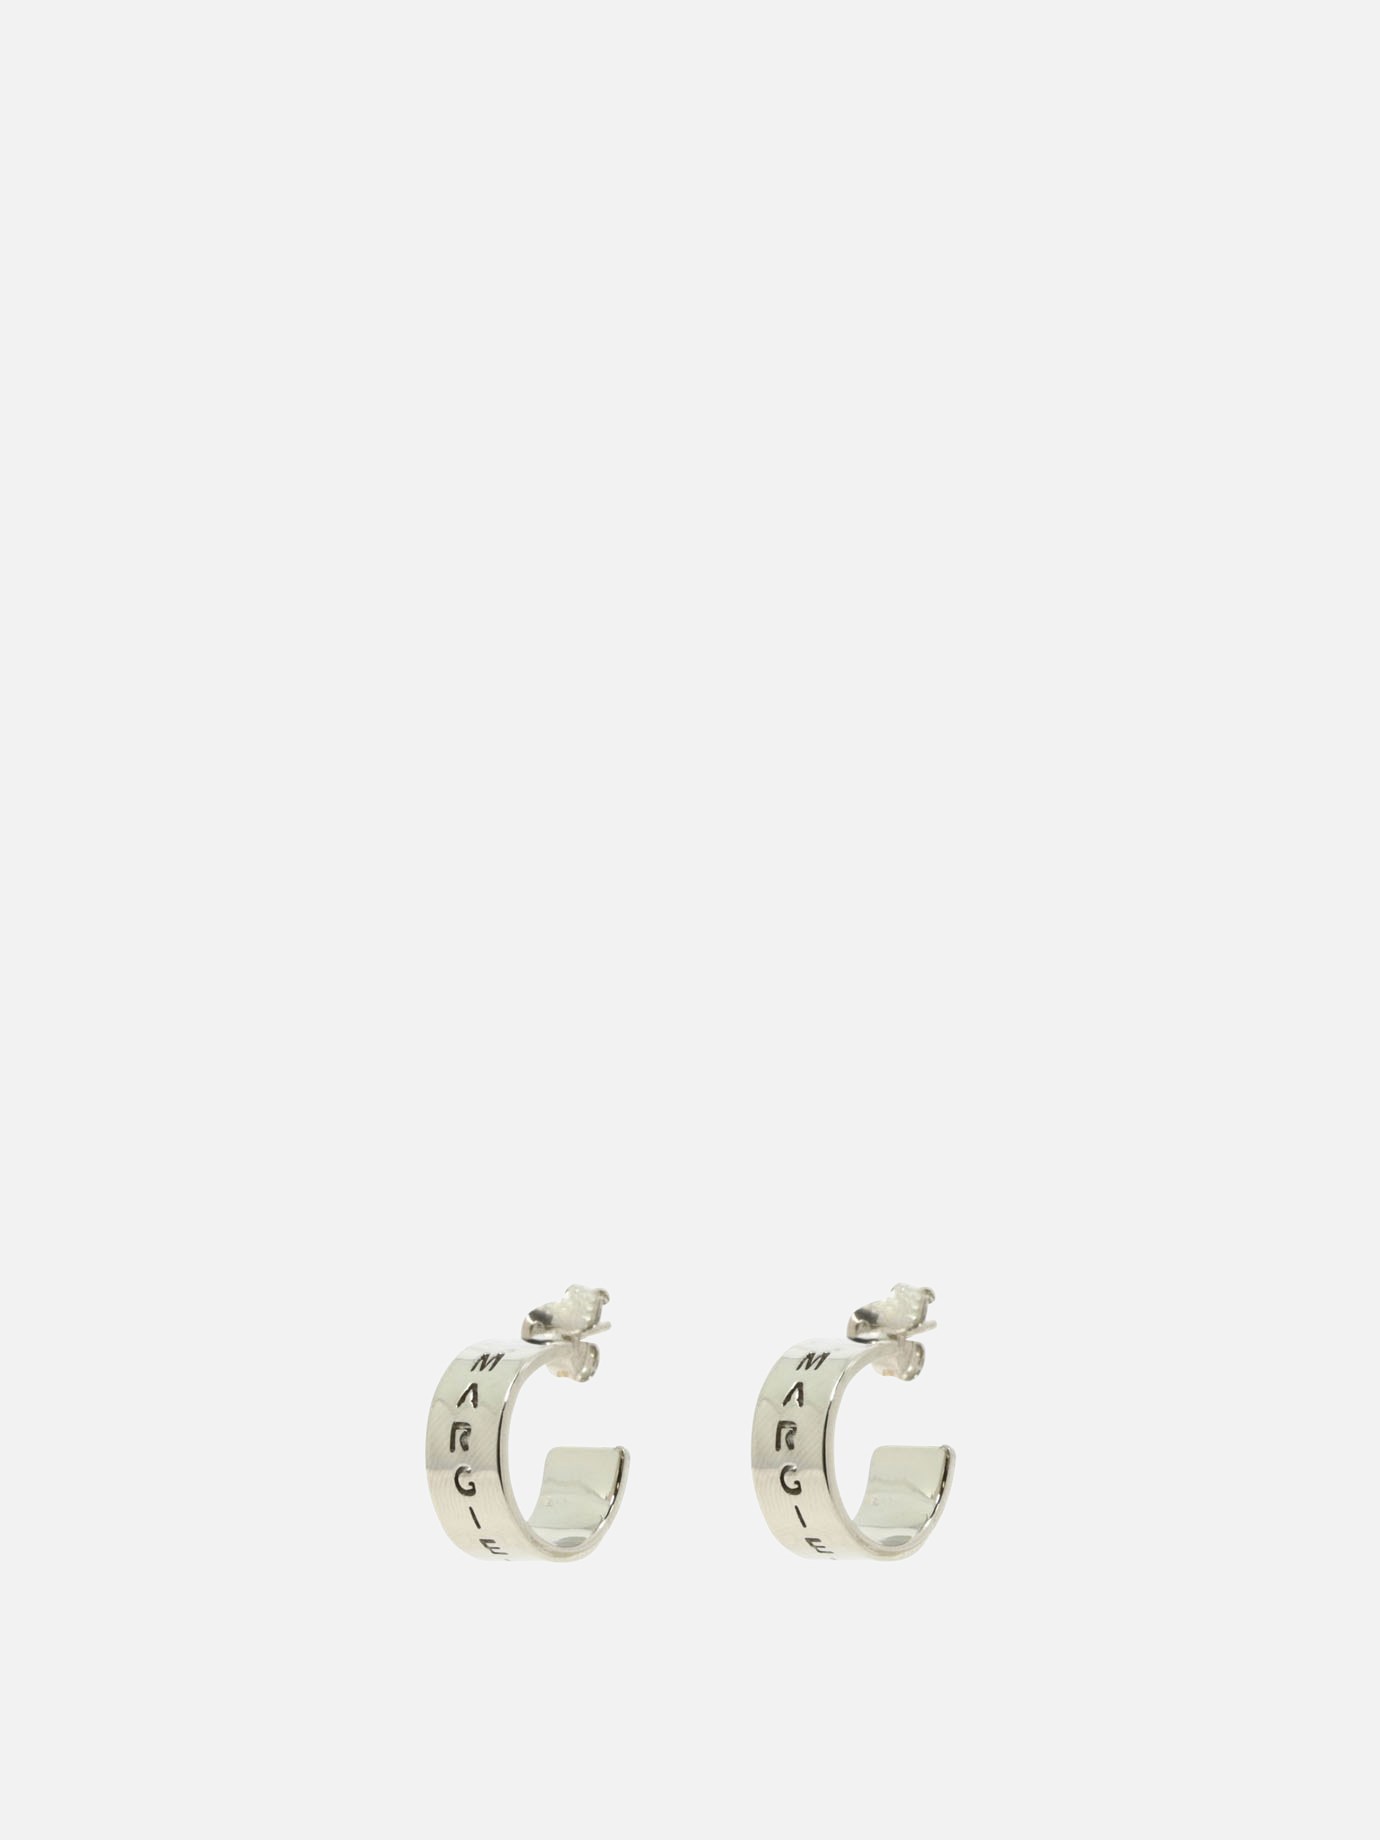 Earrings with engravingby MM6 Maison Margiela - 4